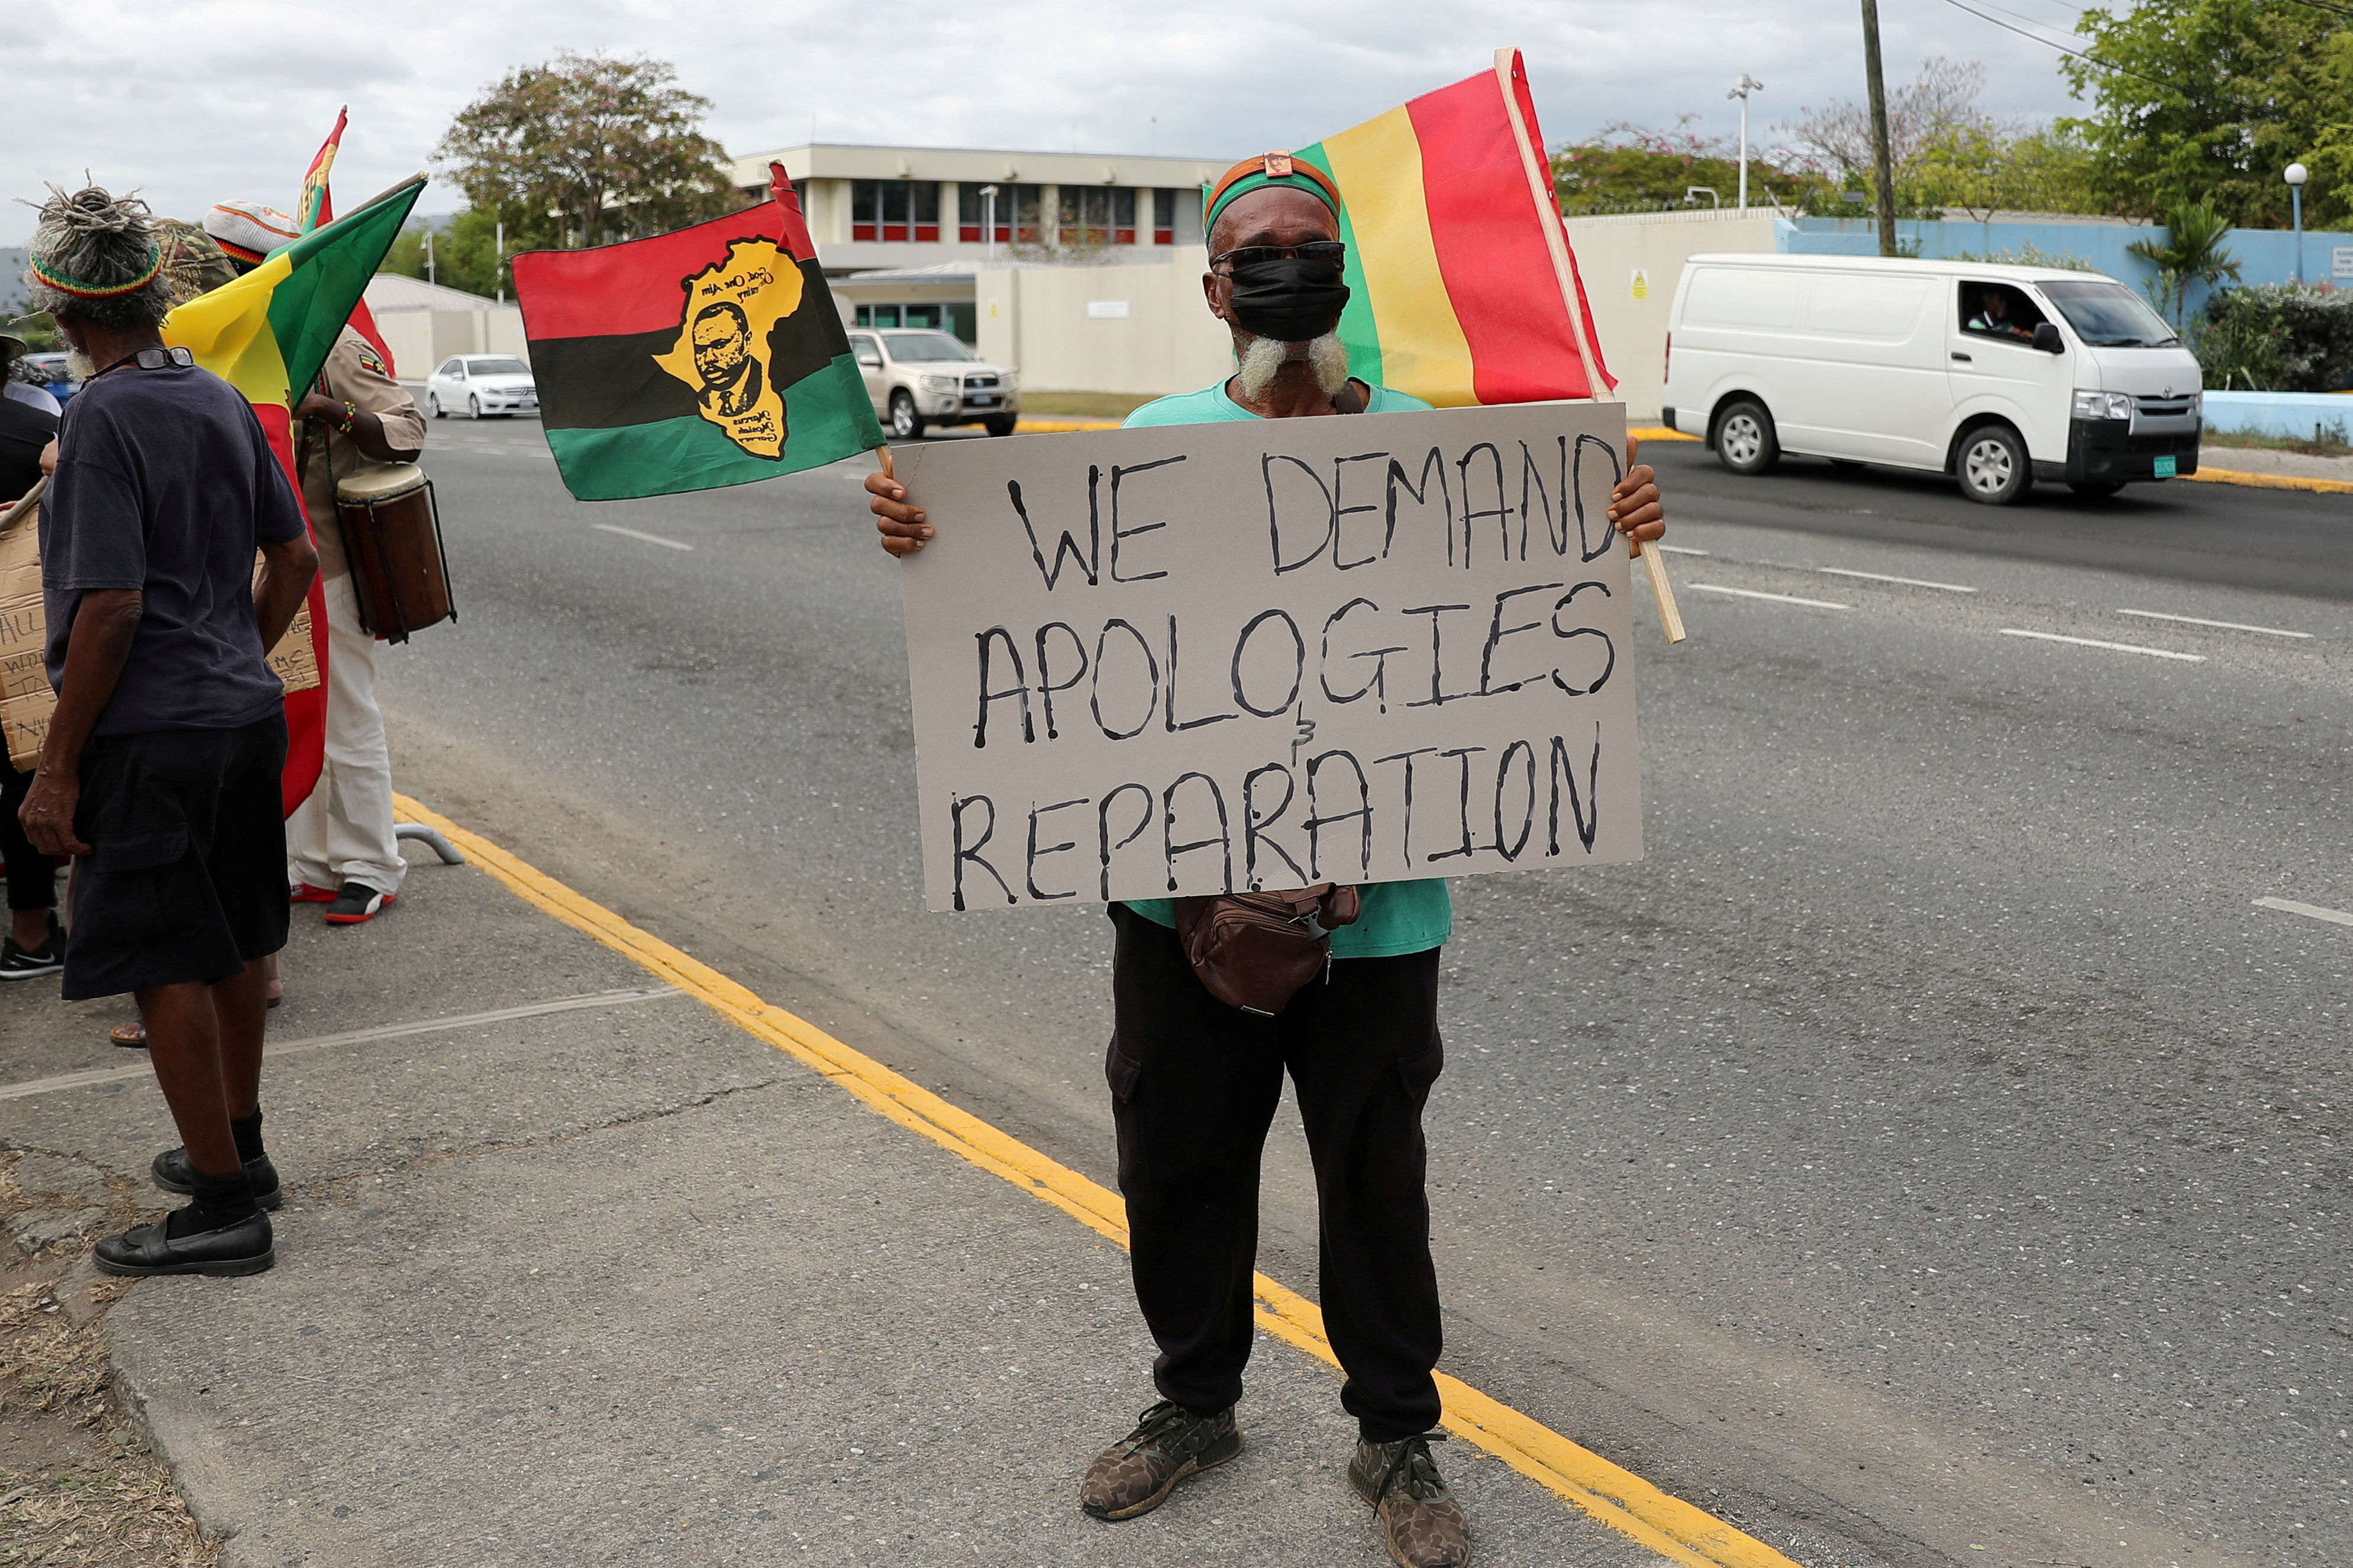 Jamaican protesters demand slavery reparations ahead of Royal Family visit, in Kingston